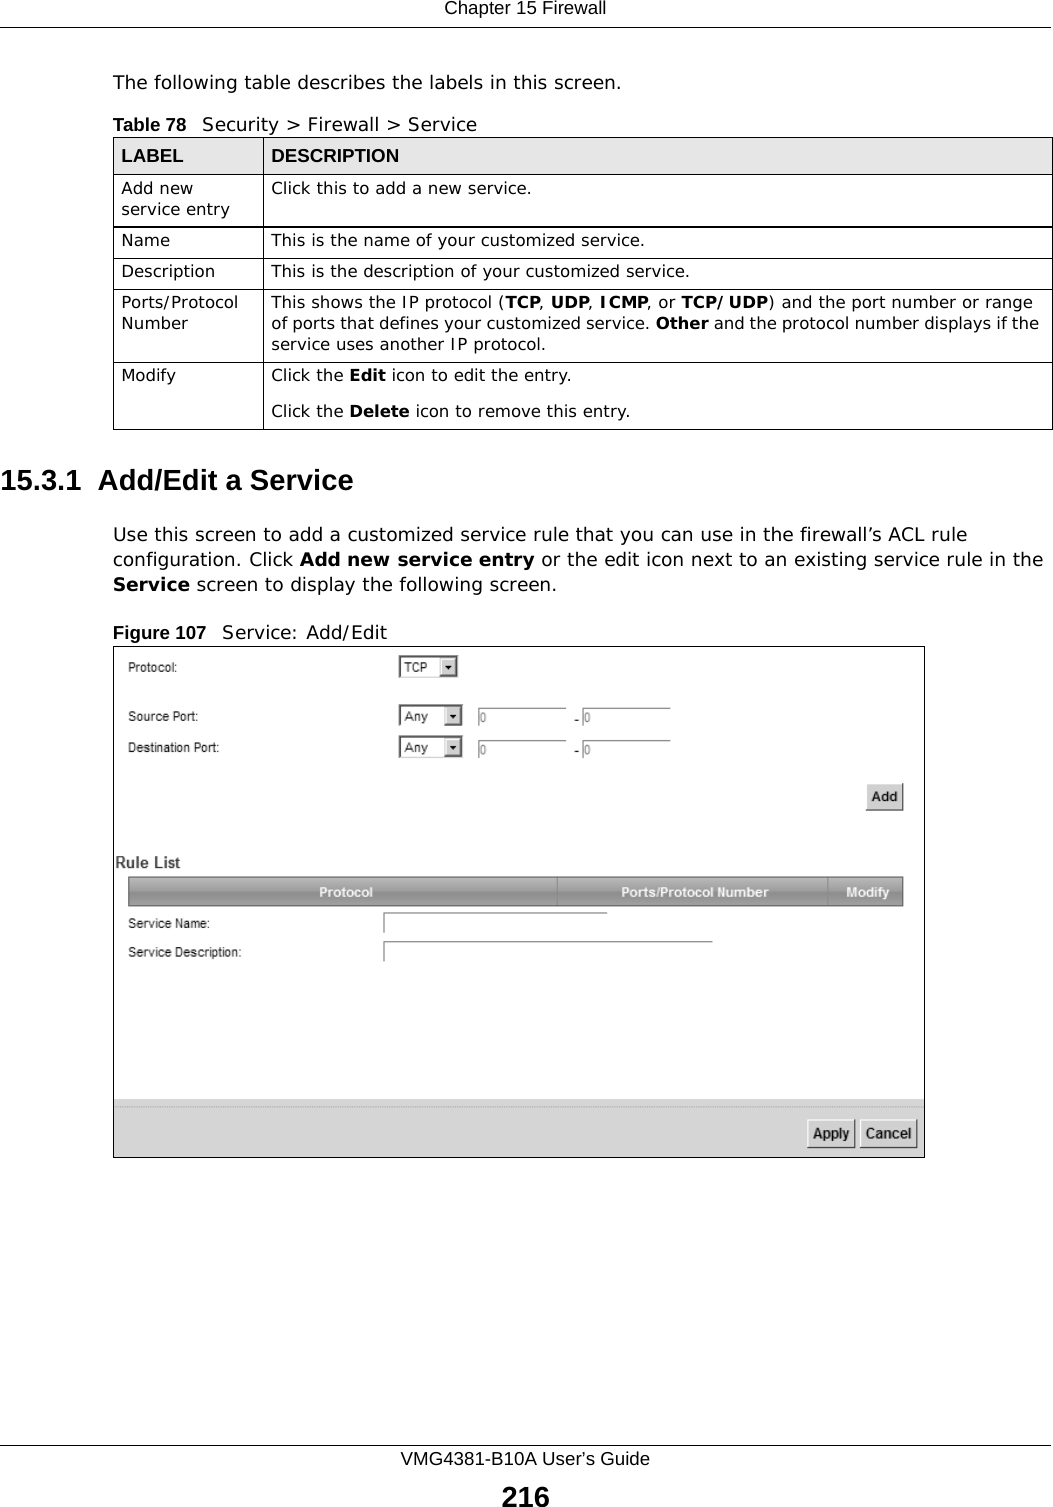 Chapter 15 FirewallVMG4381-B10A User’s Guide216The following table describes the labels in this screen. 15.3.1  Add/Edit a Service Use this screen to add a customized service rule that you can use in the firewall’s ACL rule configuration. Click Add new service entry or the edit icon next to an existing service rule in the Service screen to display the following screen.Figure 107   Service: Add/EditTable 78   Security &gt; Firewall &gt; ServiceLABEL DESCRIPTIONAdd new service entry Click this to add a new service.Name This is the name of your customized service.Description This is the description of your customized service.Ports/Protocol Number This shows the IP protocol (TCP, UDP, ICMP, or TCP/UDP) and the port number or range of ports that defines your customized service. Other and the protocol number displays if the service uses another IP protocol.Modify Click the Edit icon to edit the entry.Click the Delete icon to remove this entry.